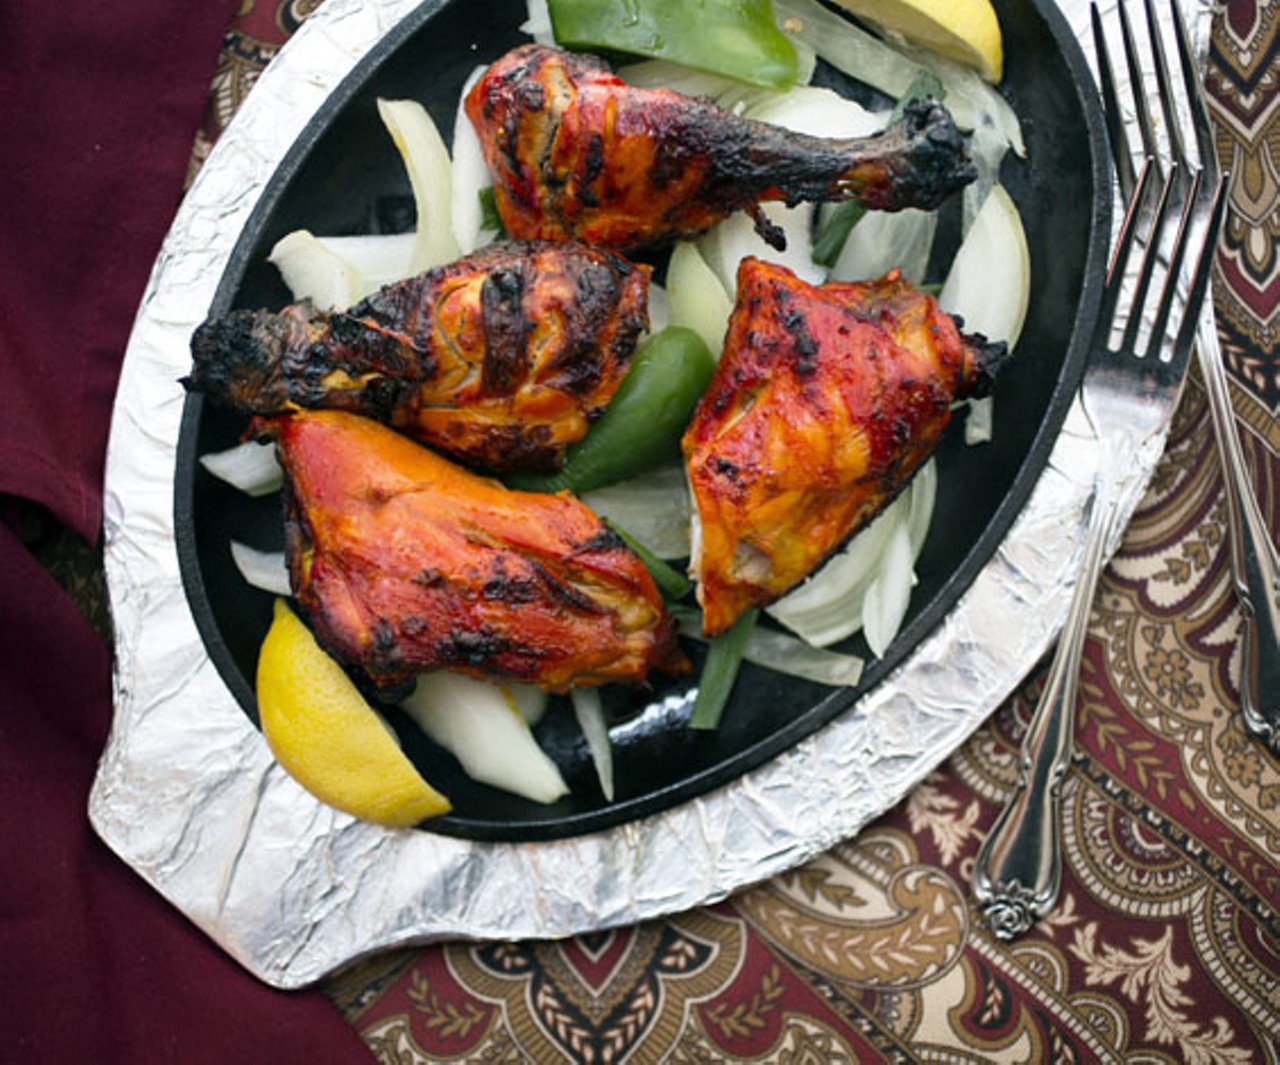 With the tandoori chicken, the poultry is marinated in yogurt and spices, then broiled over mesquite in a tandoor oven.